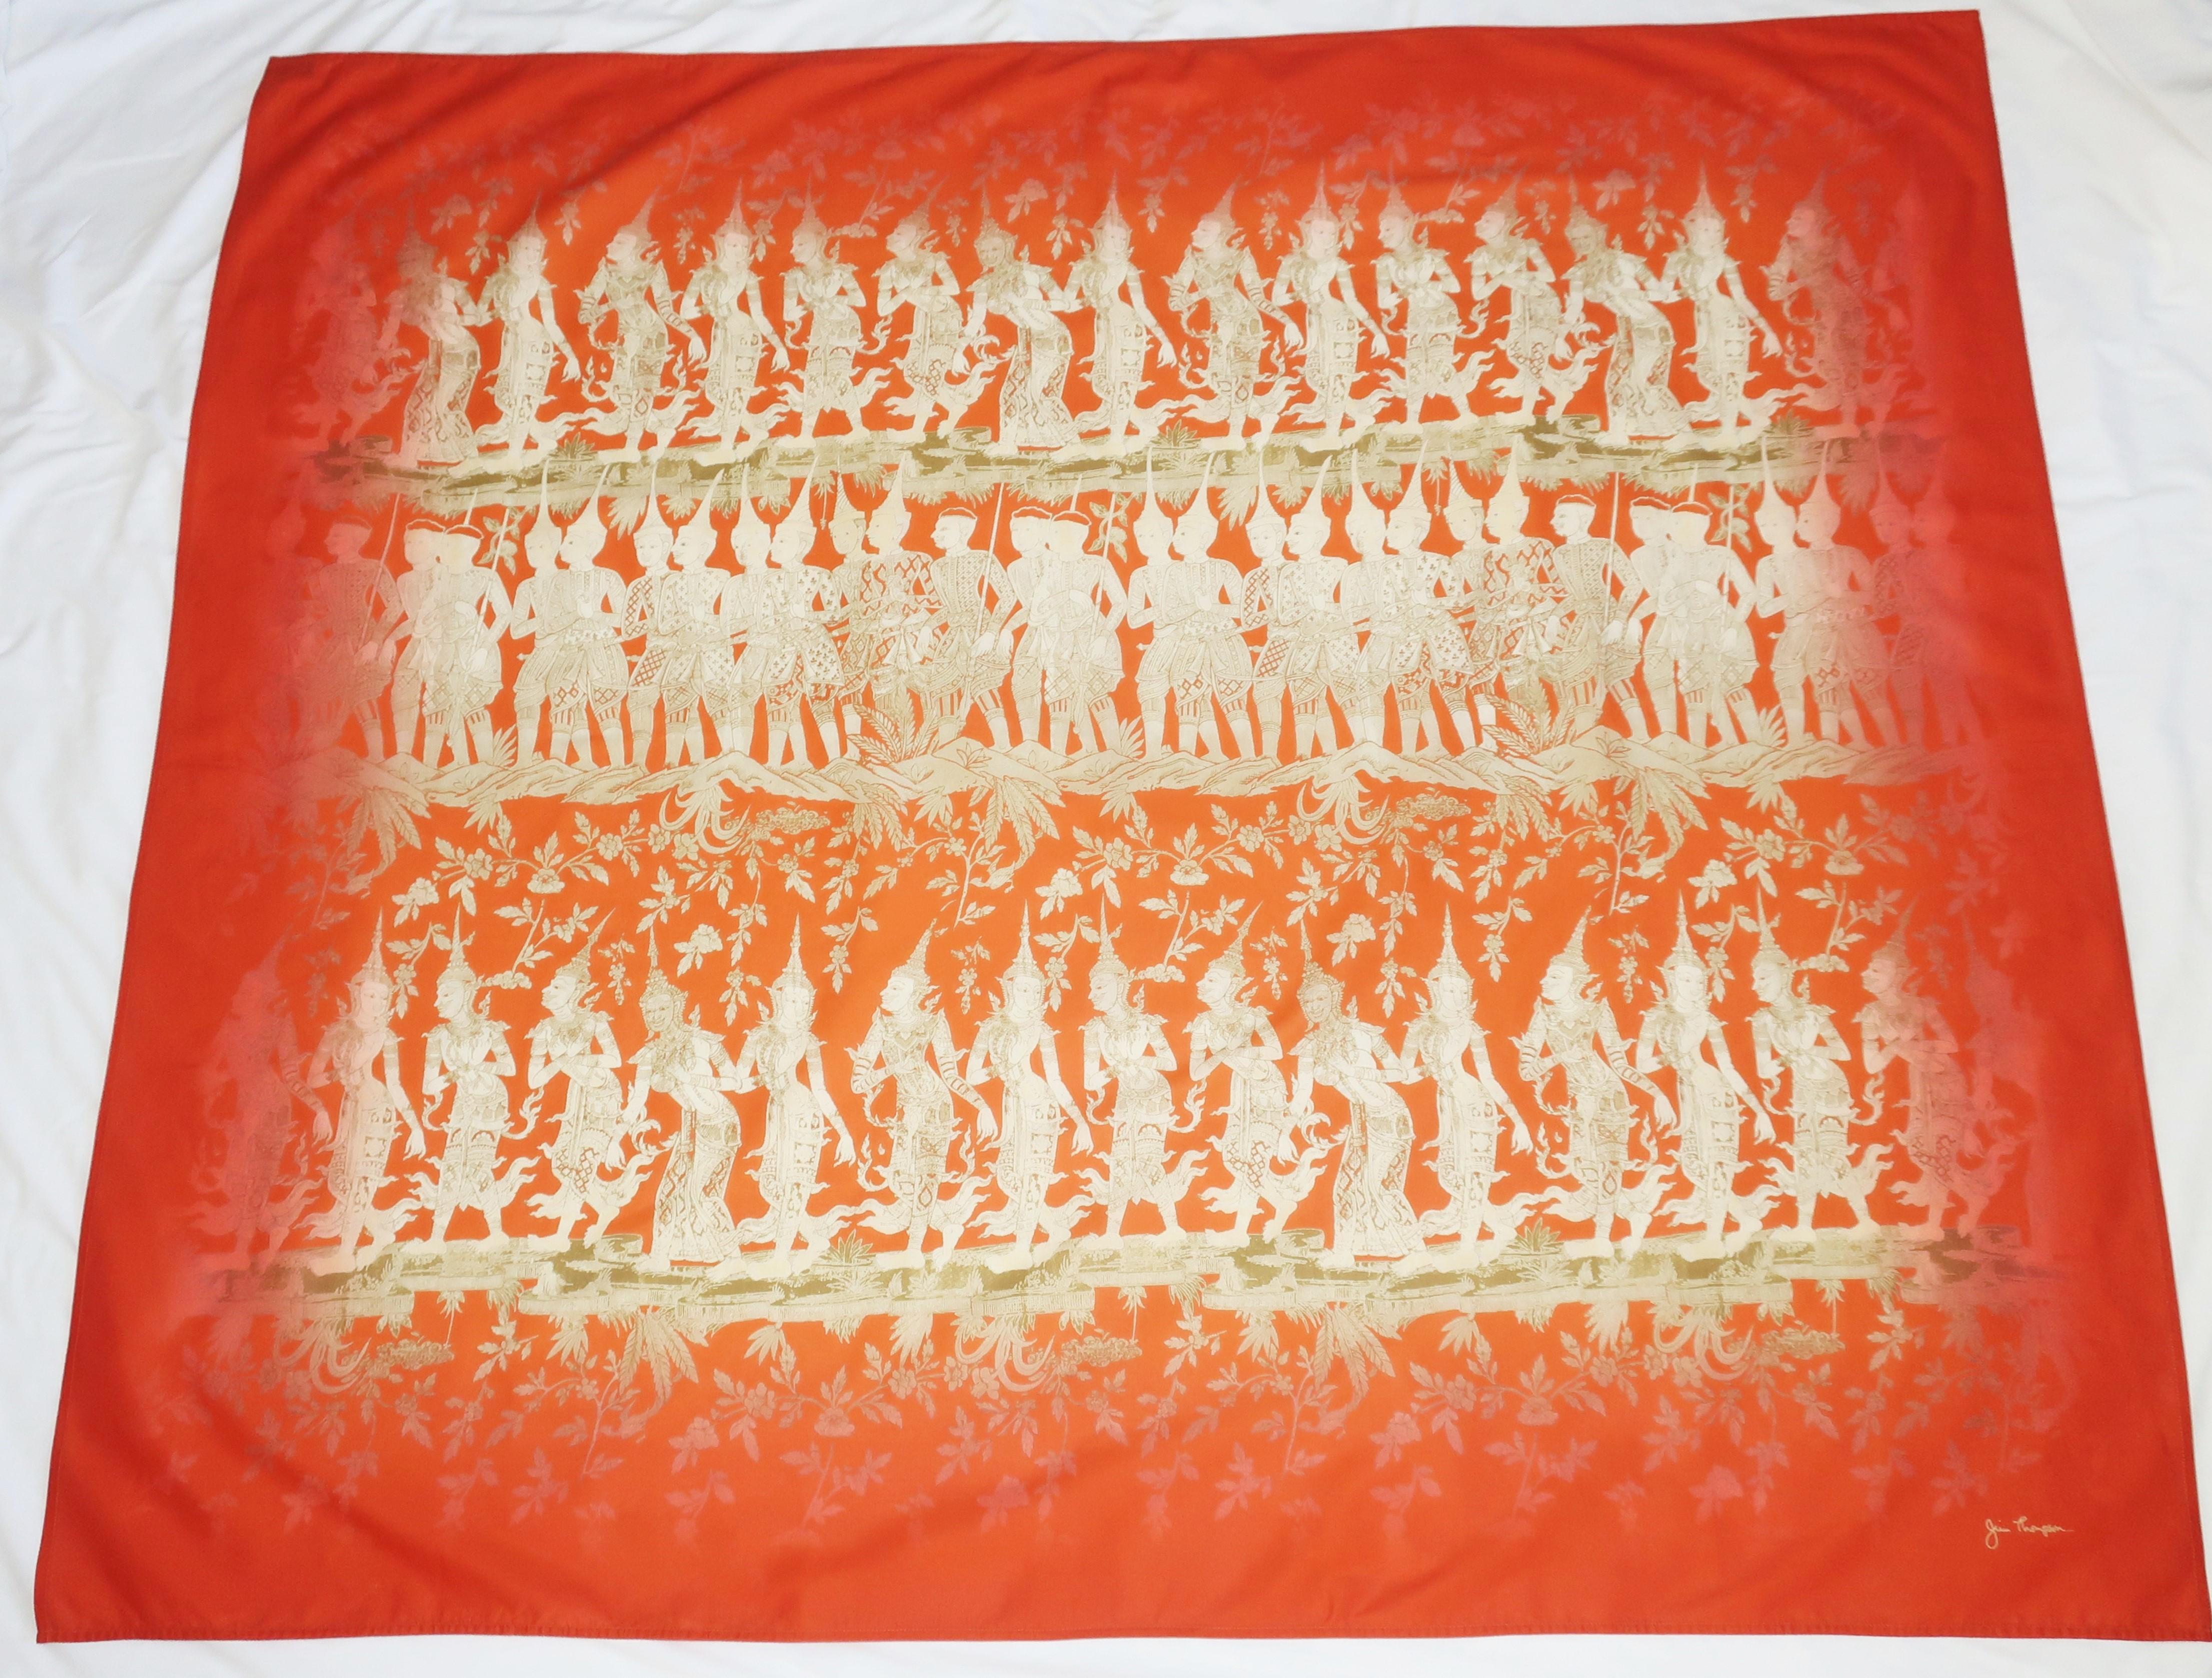 Jim Thompson fine cotton scarf in an extra large size that makes it suitable to wear as a sarong or shawl wrap.  The deep orange back ground is the perfect setting for a print depicting an ancient scene with figures in traditional Thai costumes